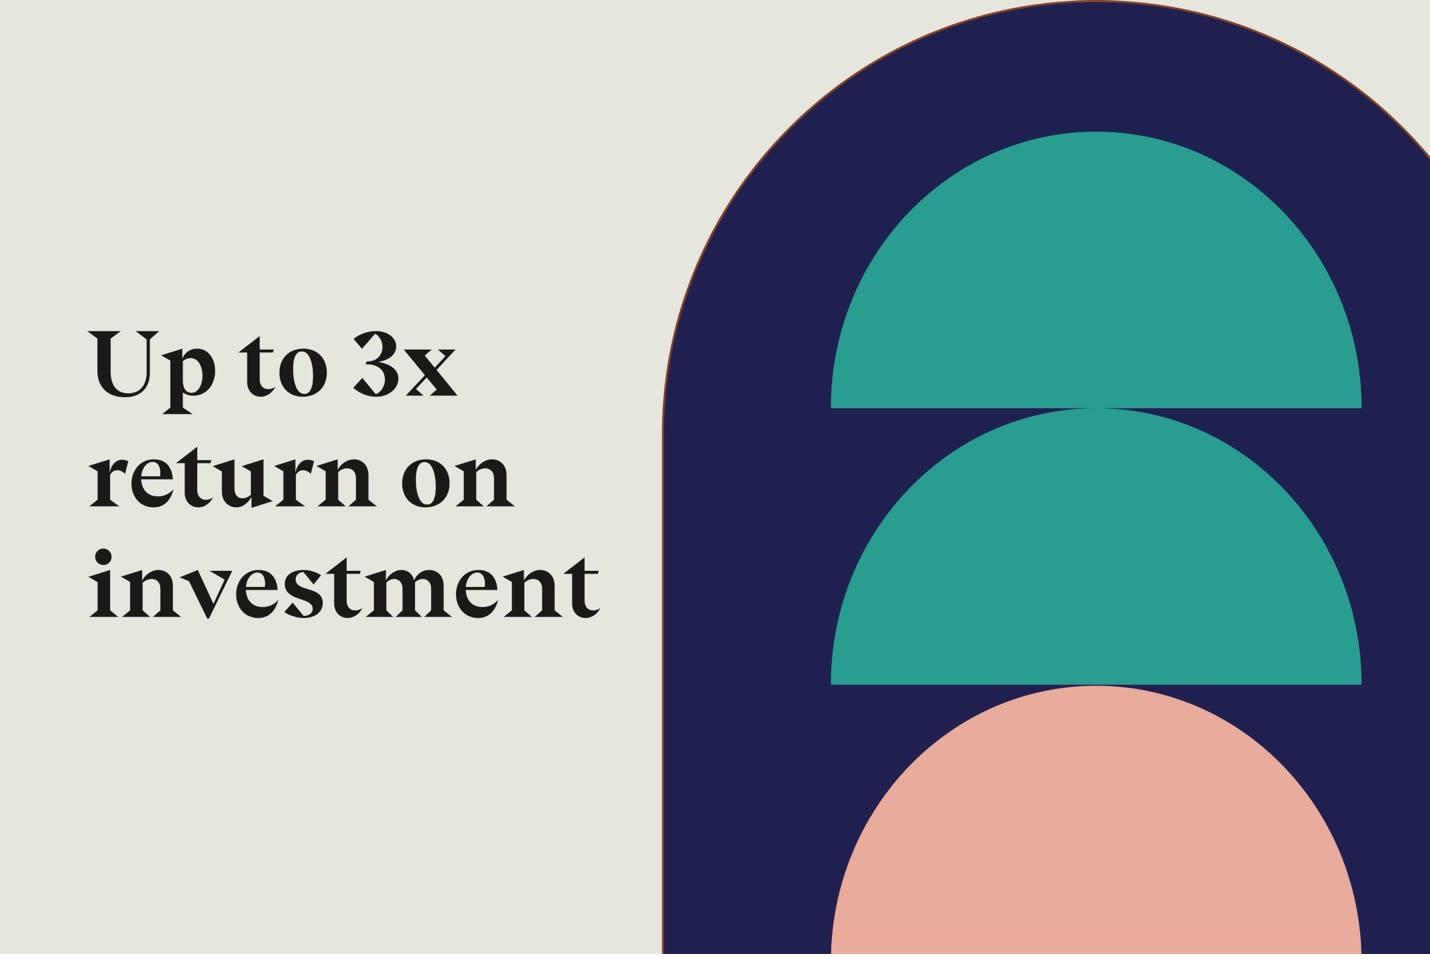 Up to 3x return on investment illustration